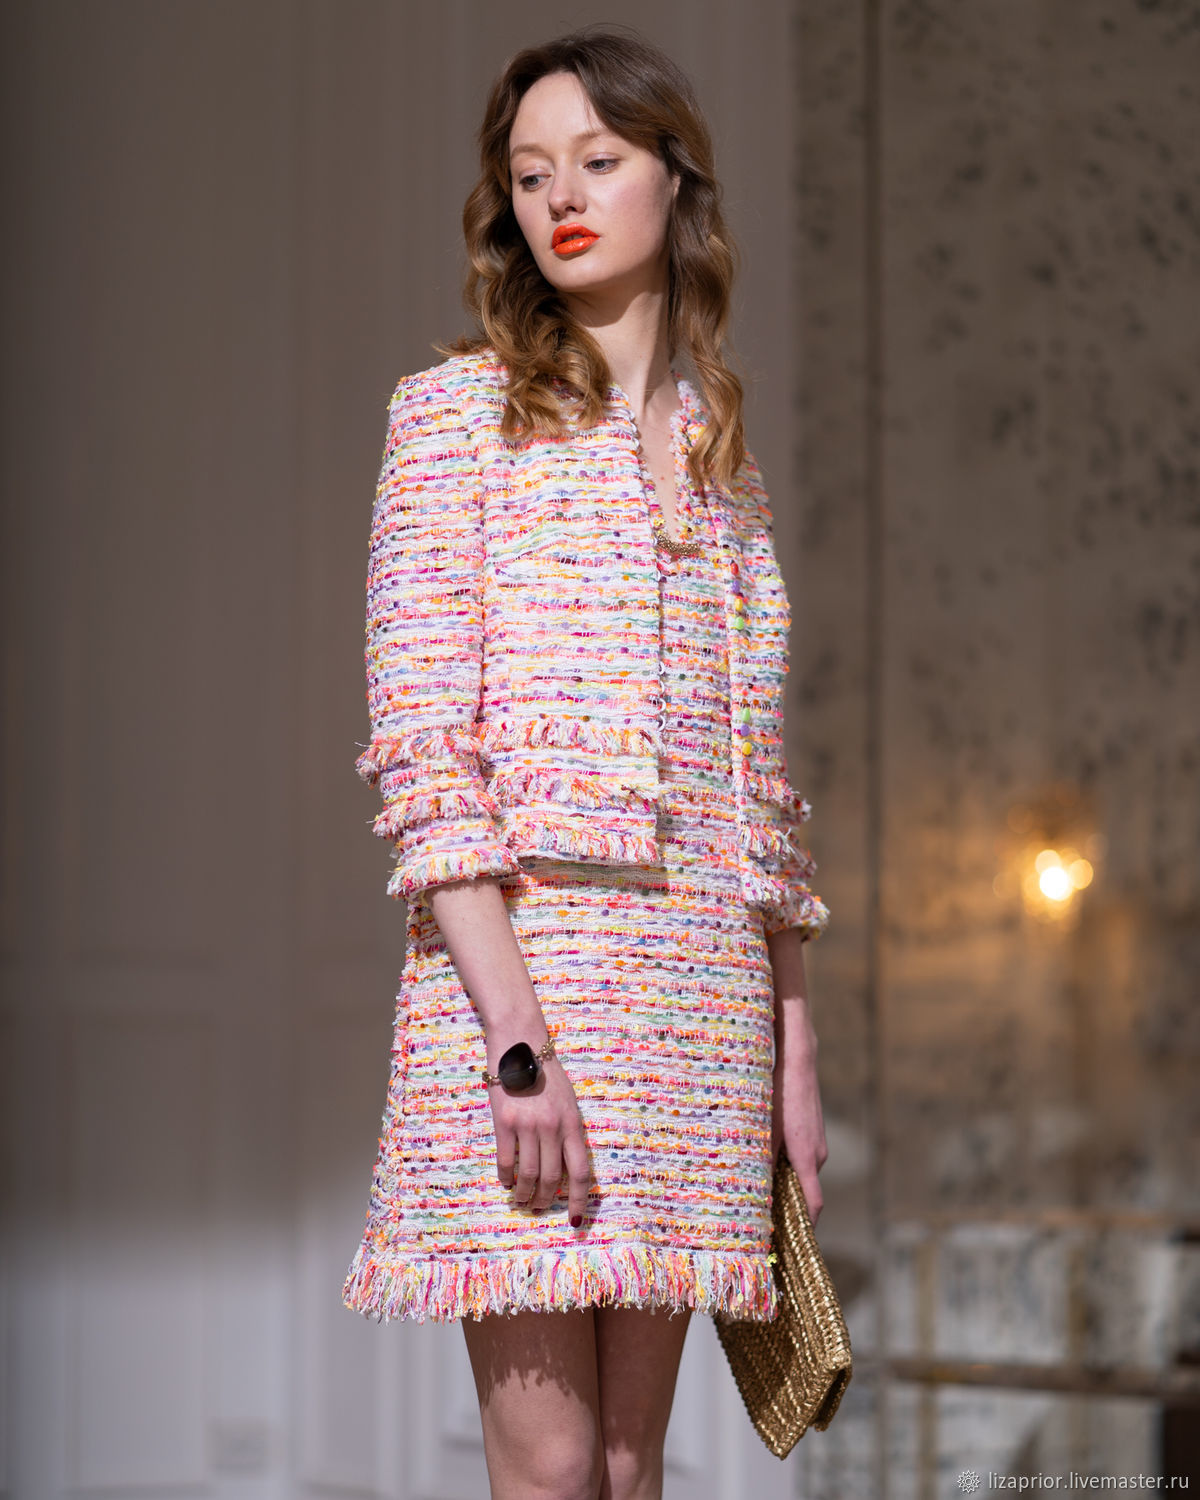 Chanel style jacket in colored tweed, Jackets, Moscow,  Фото №1